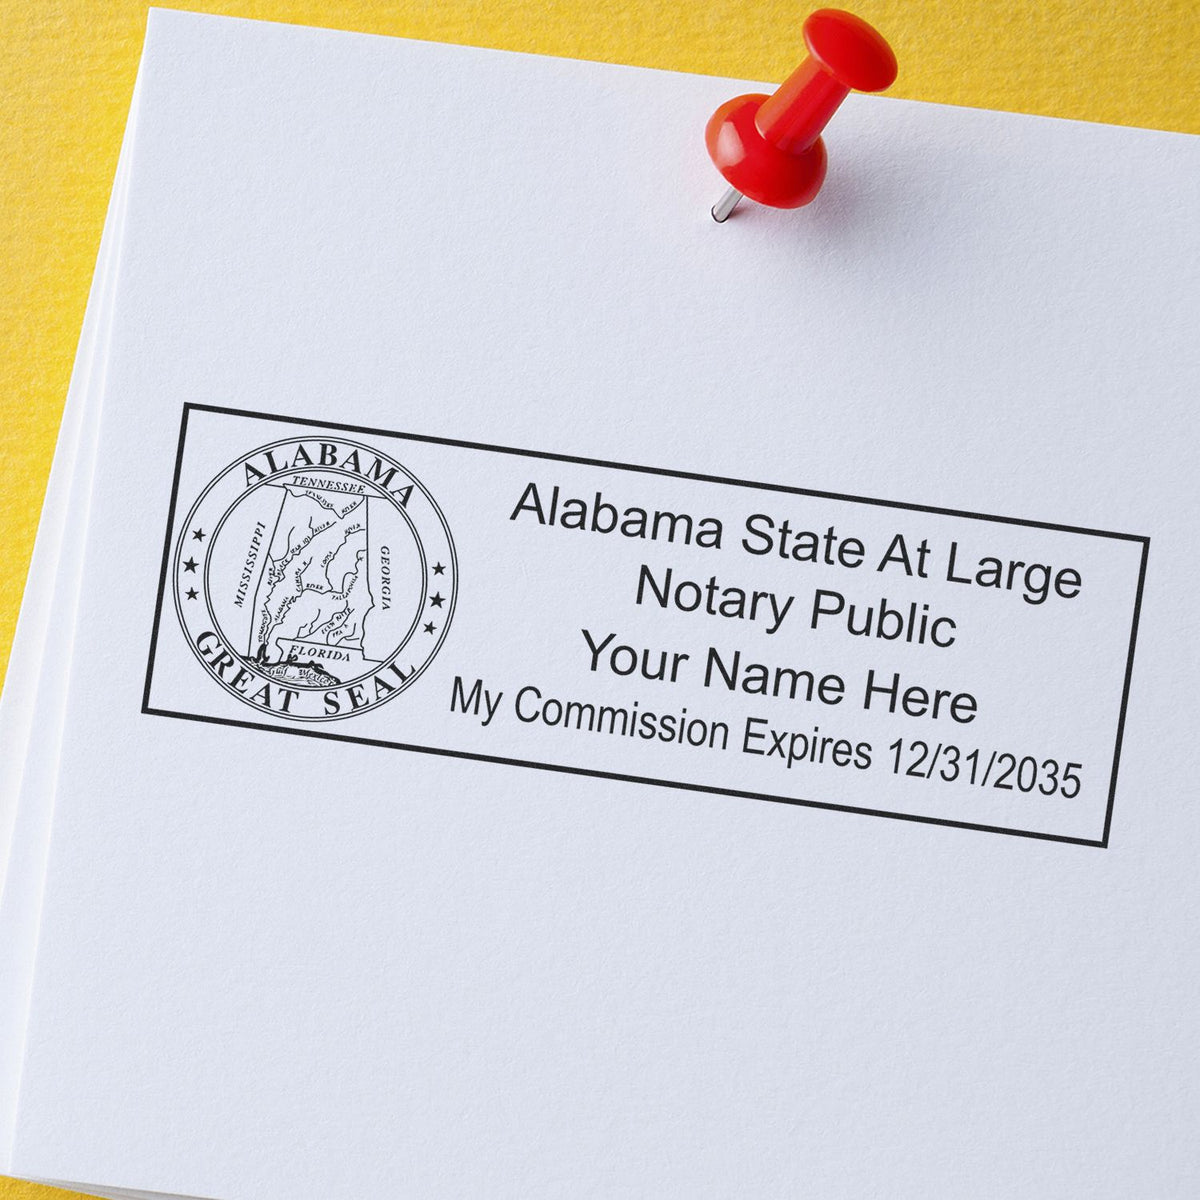 The Slim Pre-Inked State Seal Notary Stamp for Alabama stamp impression comes to life with a crisp, detailed photo on paper - showcasing true professional quality.